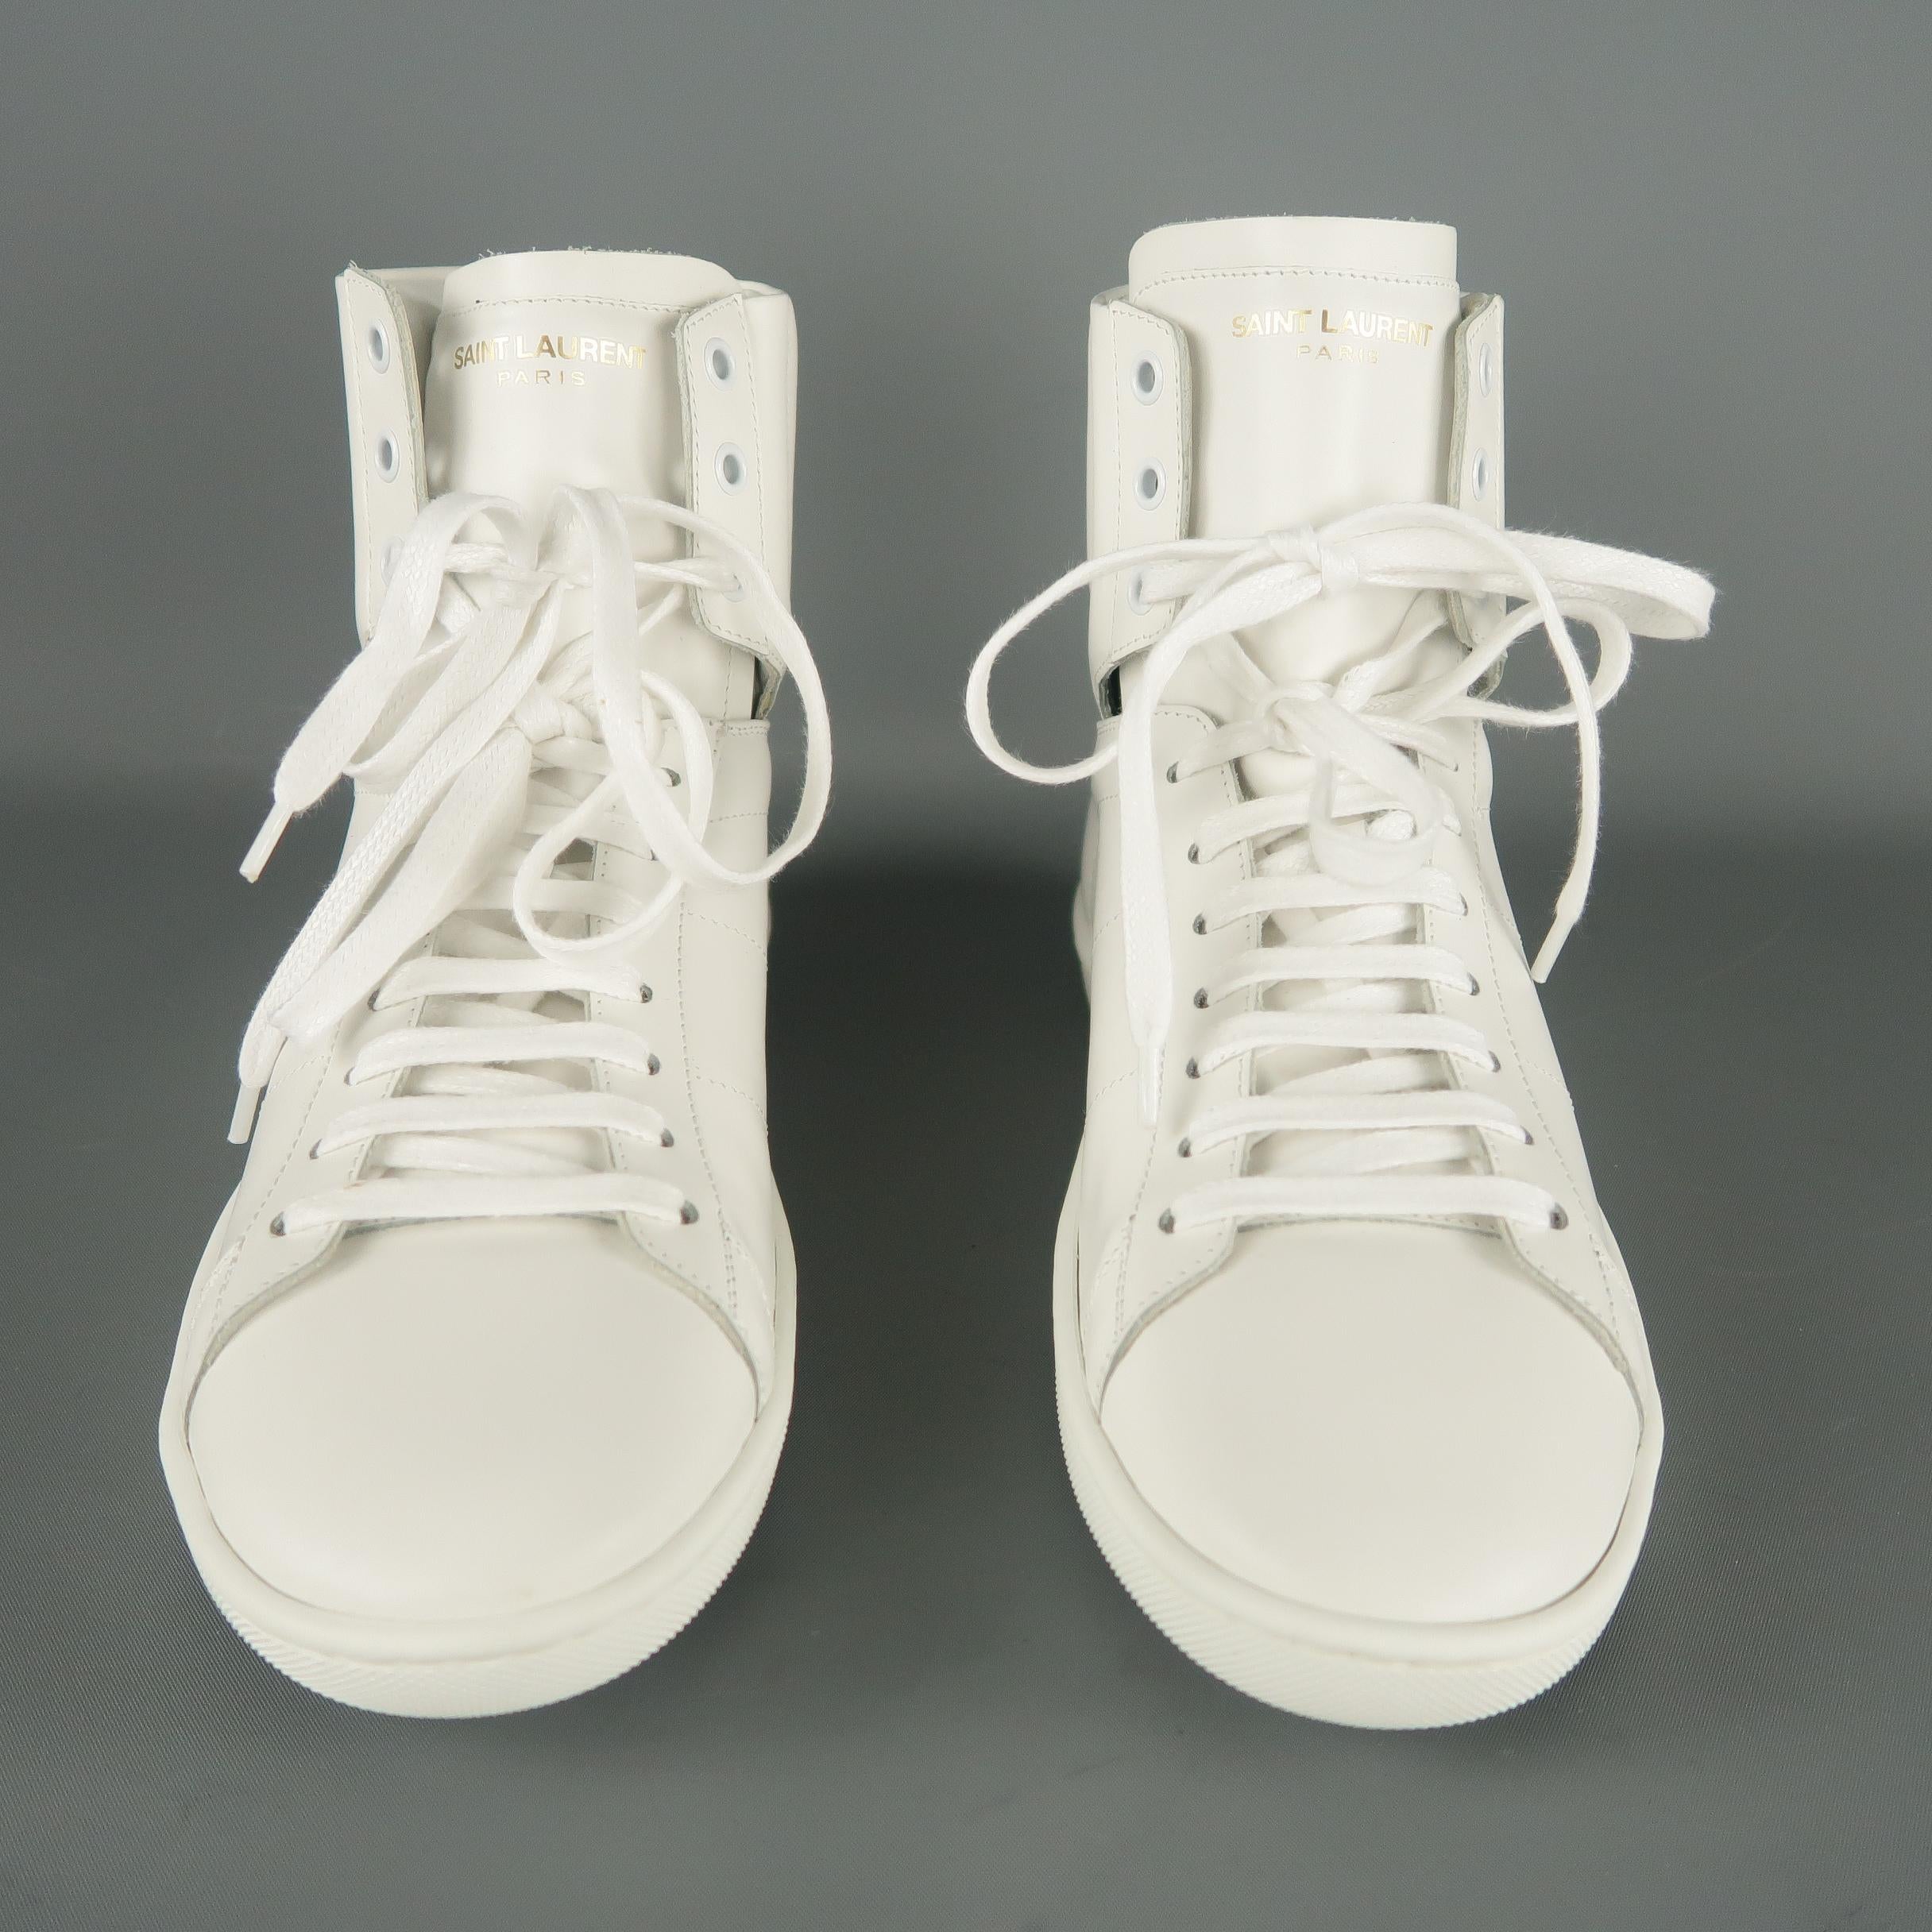 Men's SAINT LAURENT Size 6 White Leather High Top Sneakers w/ Box 1